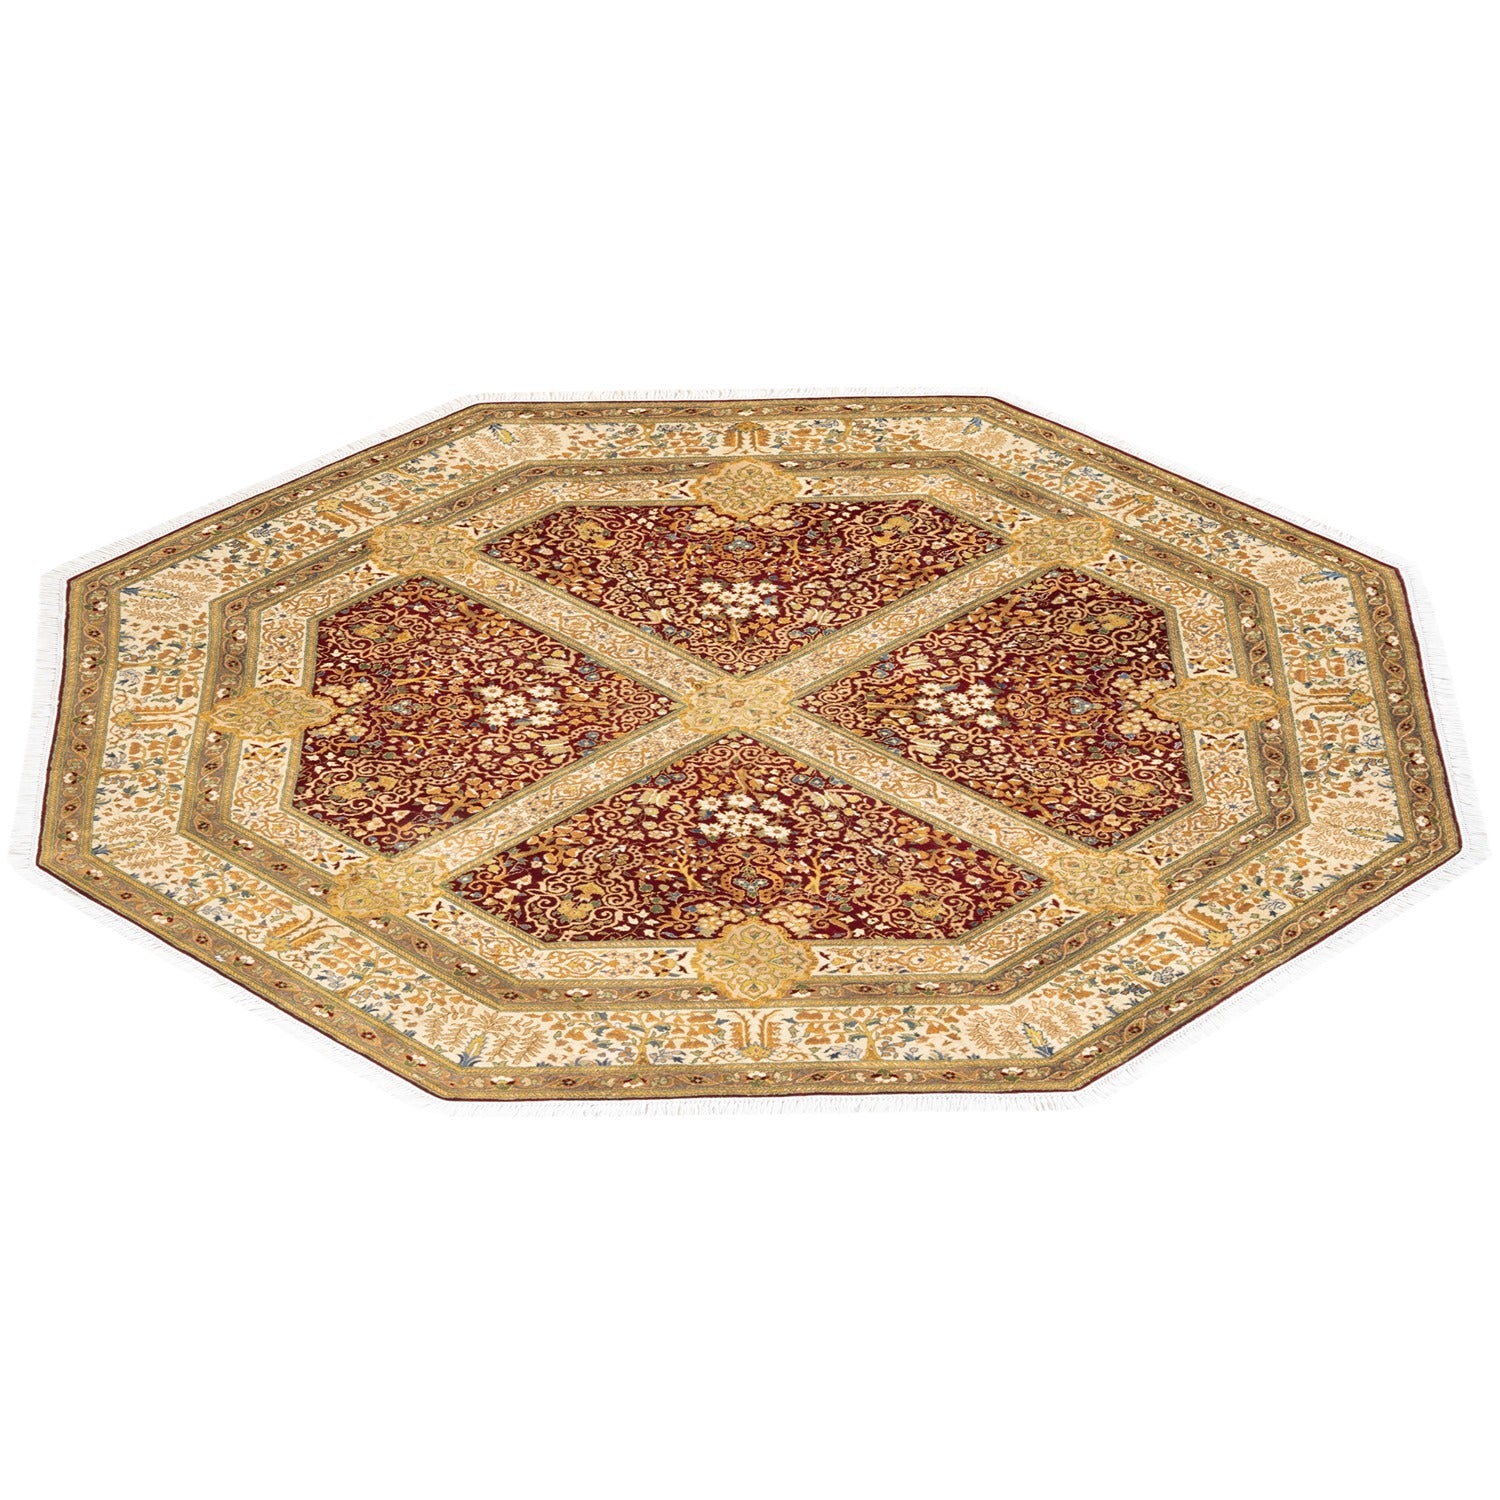 Intricately patterned octagonal rug featuring red, beige, floral, and geometric motifs.